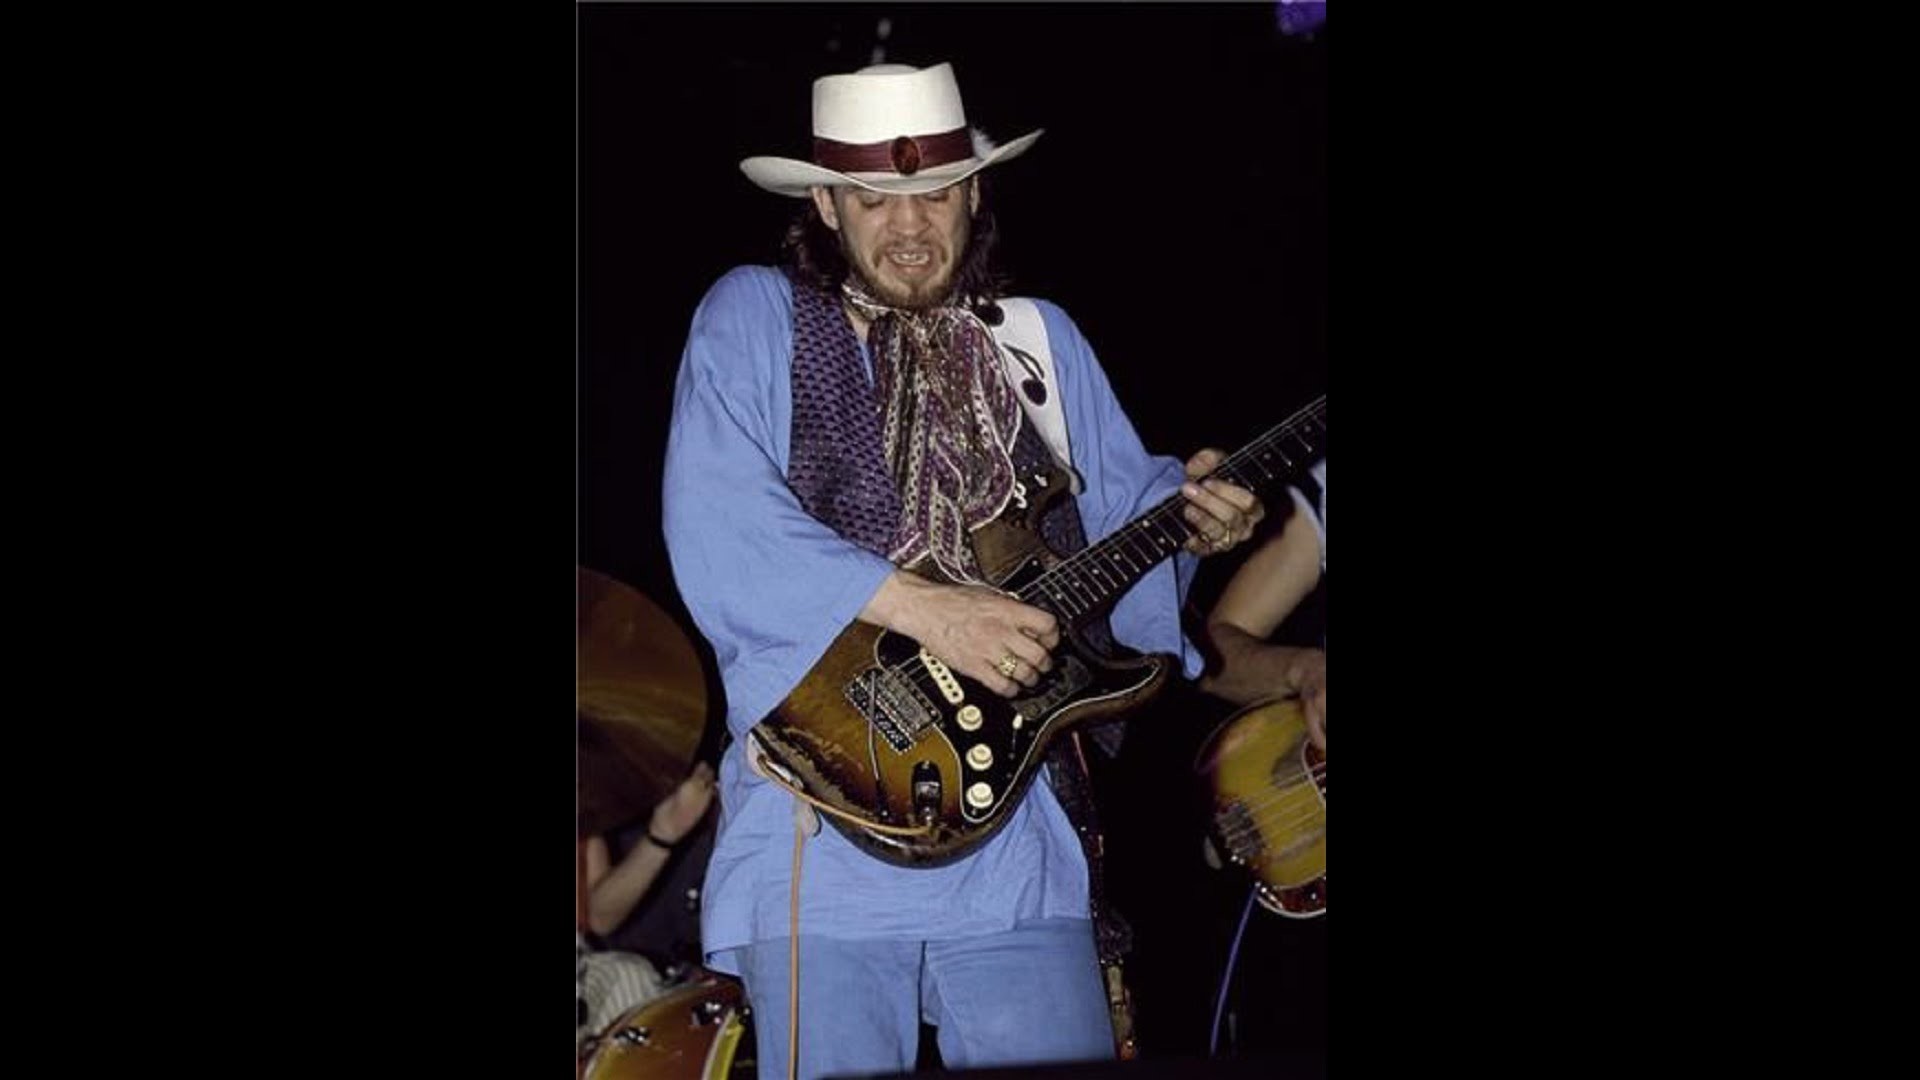 1920x1080 Stevie Ray Vaughan - 1985/10/31 - Knoxville Civic Coliseum - Knoxville, TN